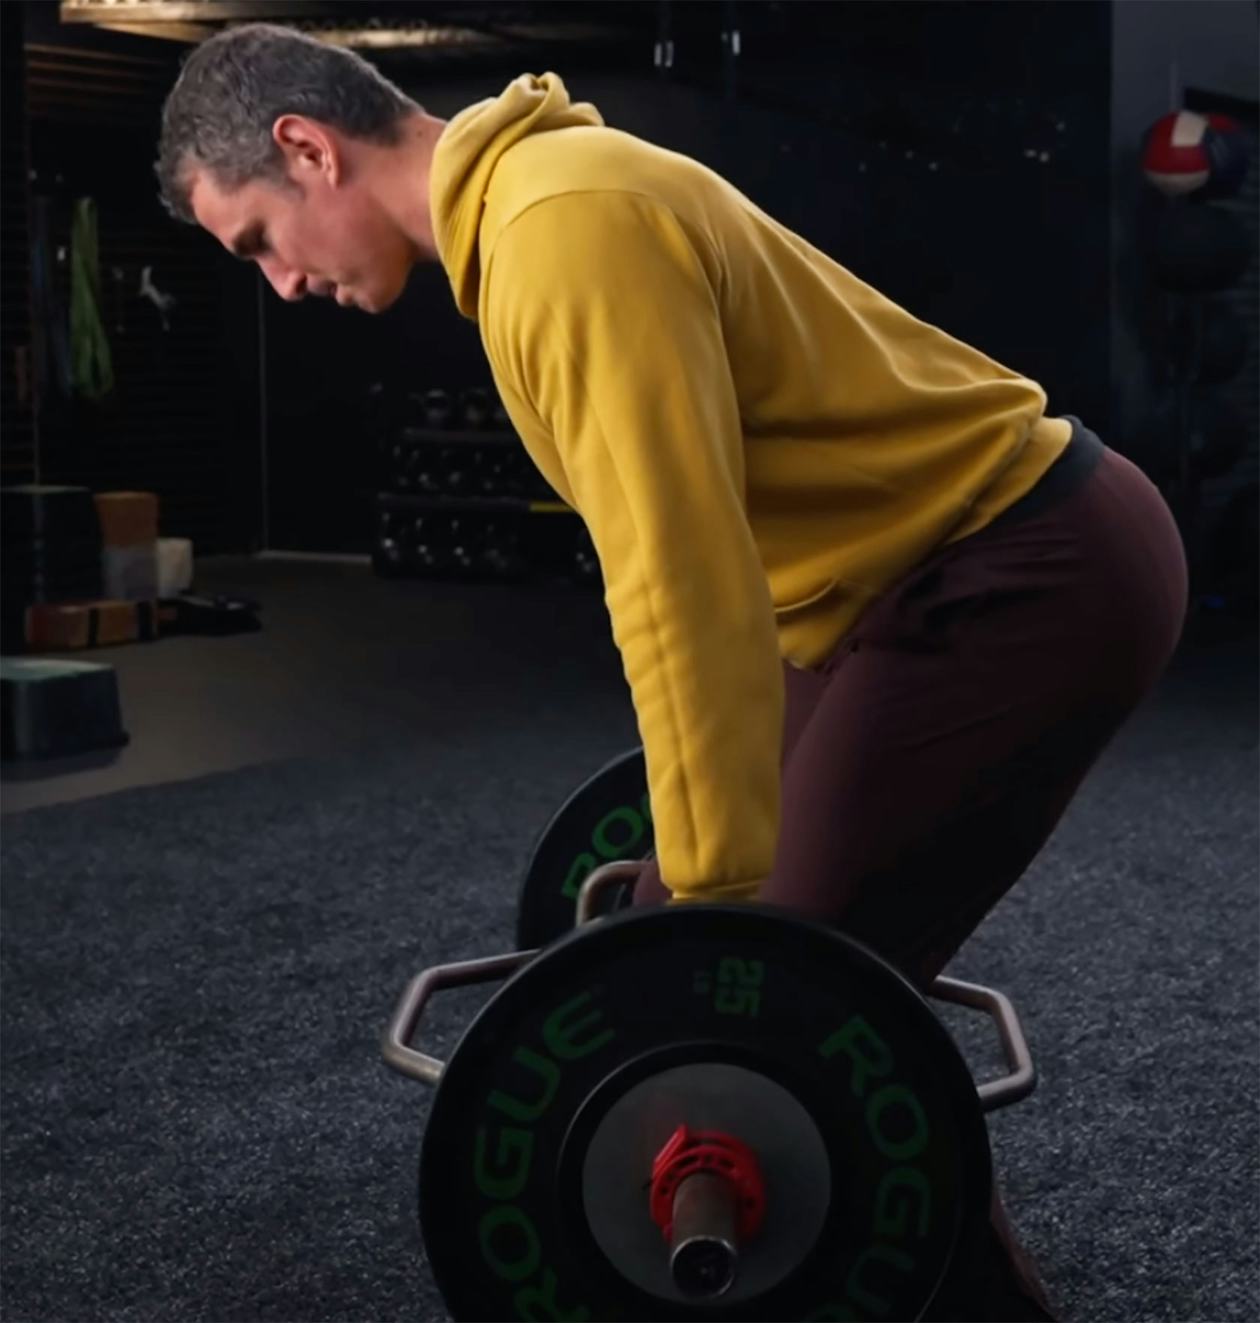 How To Do B-Stance Hip Thrusts Like An Expert - Onnit Academy